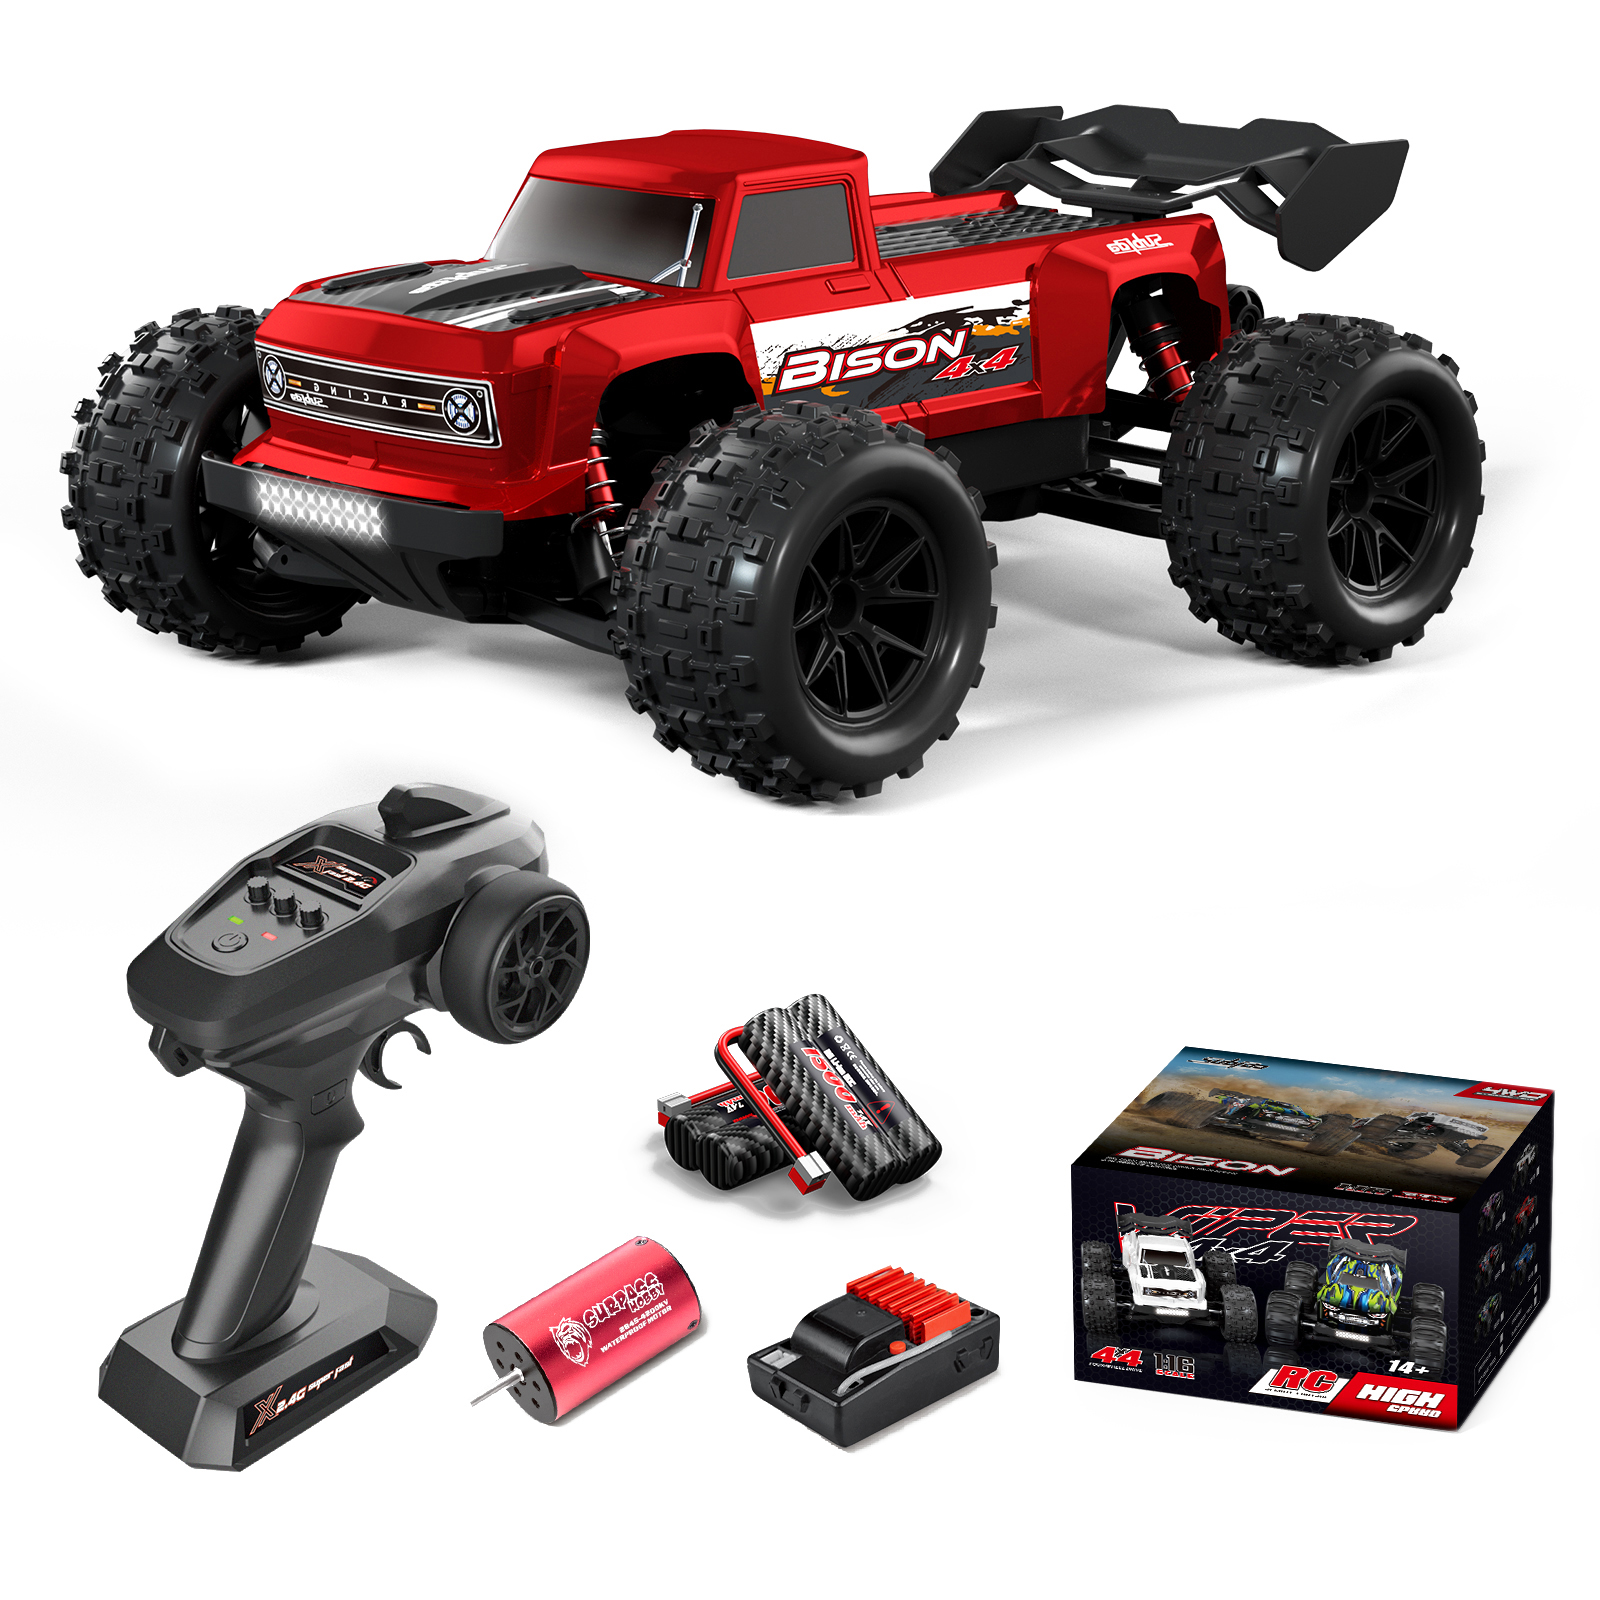 Remote Control Car 2.4G Full Scale 4wd High Speed Off-Road Vehicle Brushless Climbing Drift RC Car